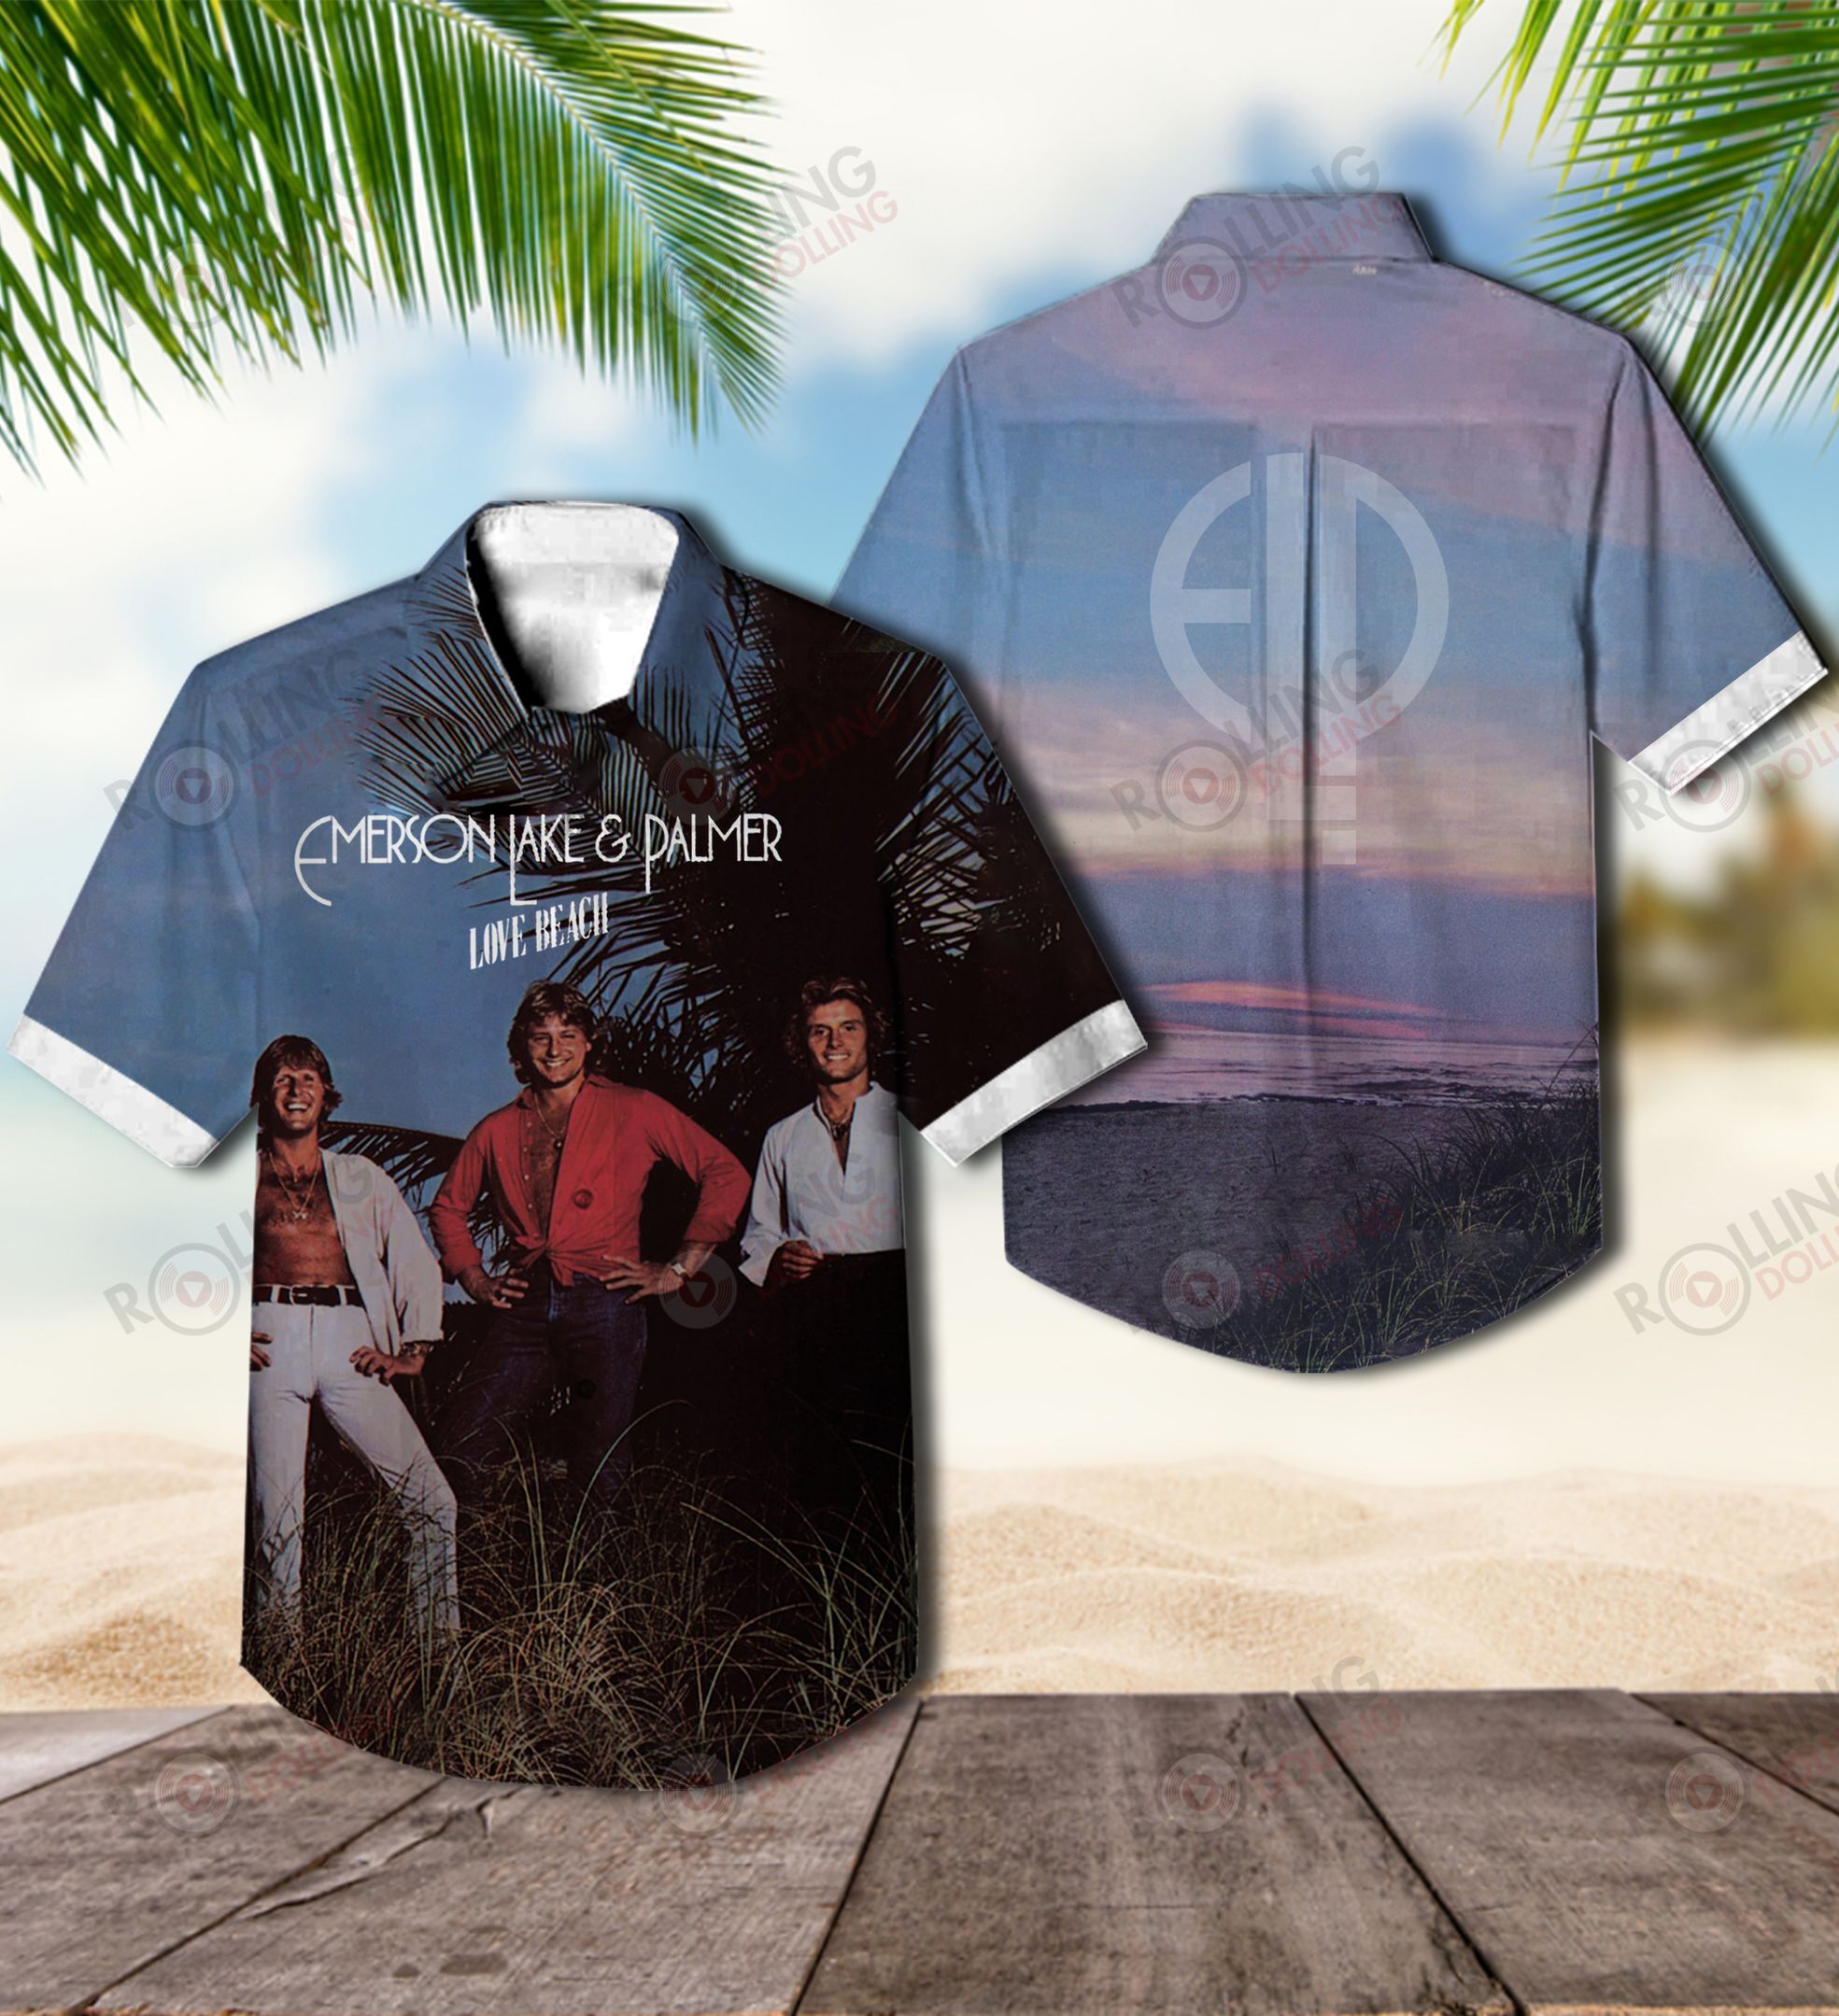 The Hawaiian Shirt is a popular shirt that is worn by Rock band fans 70